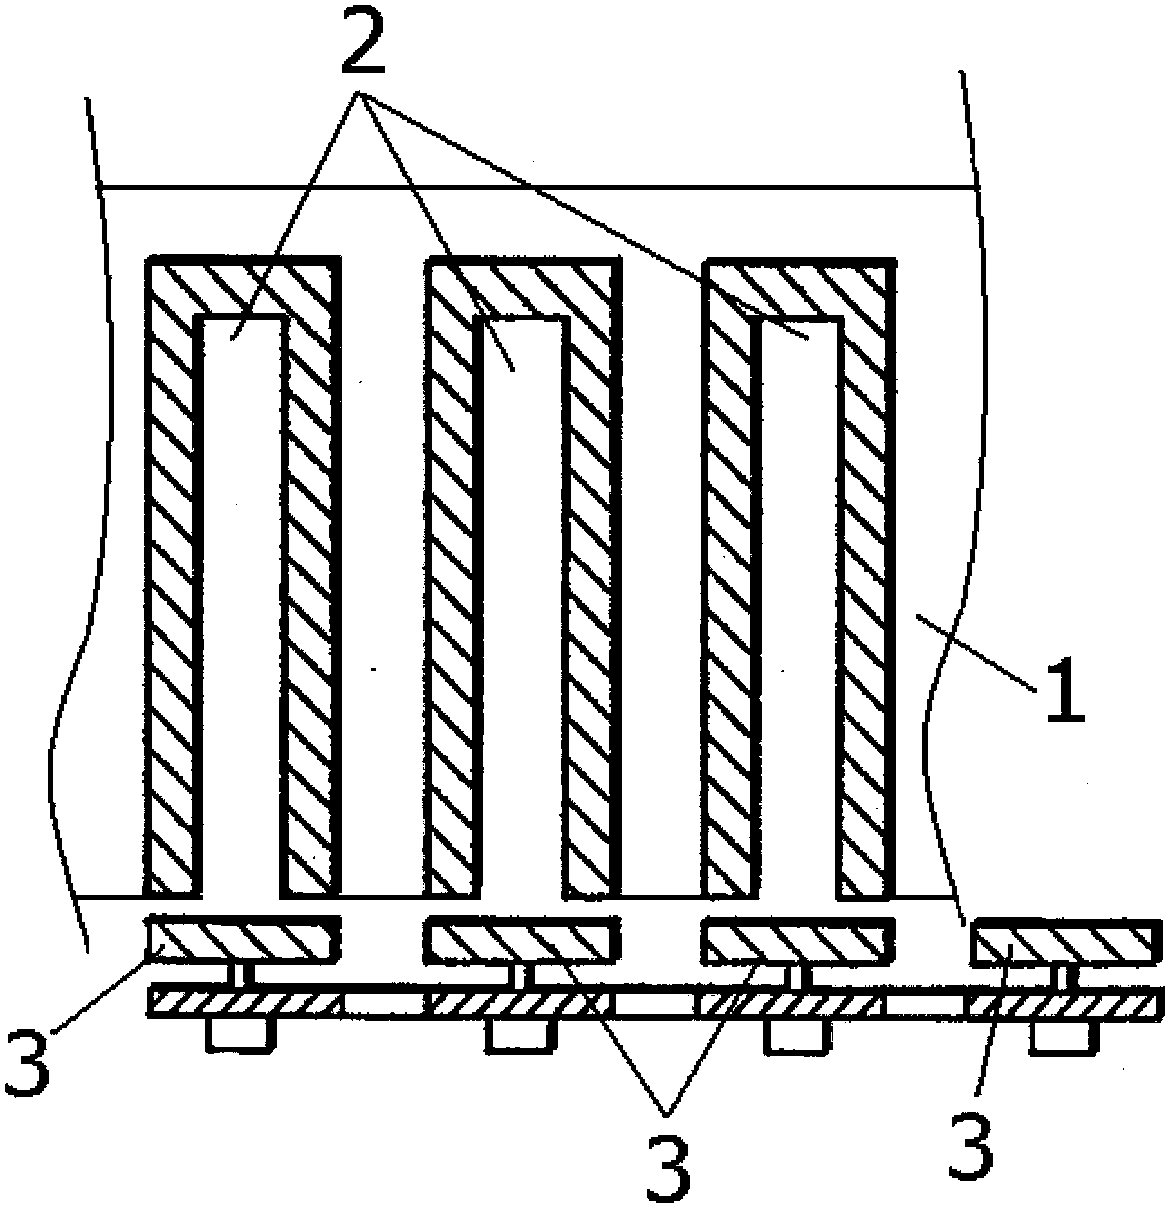 Vacuum treatment system valve assembly and chemical vapor deposition system